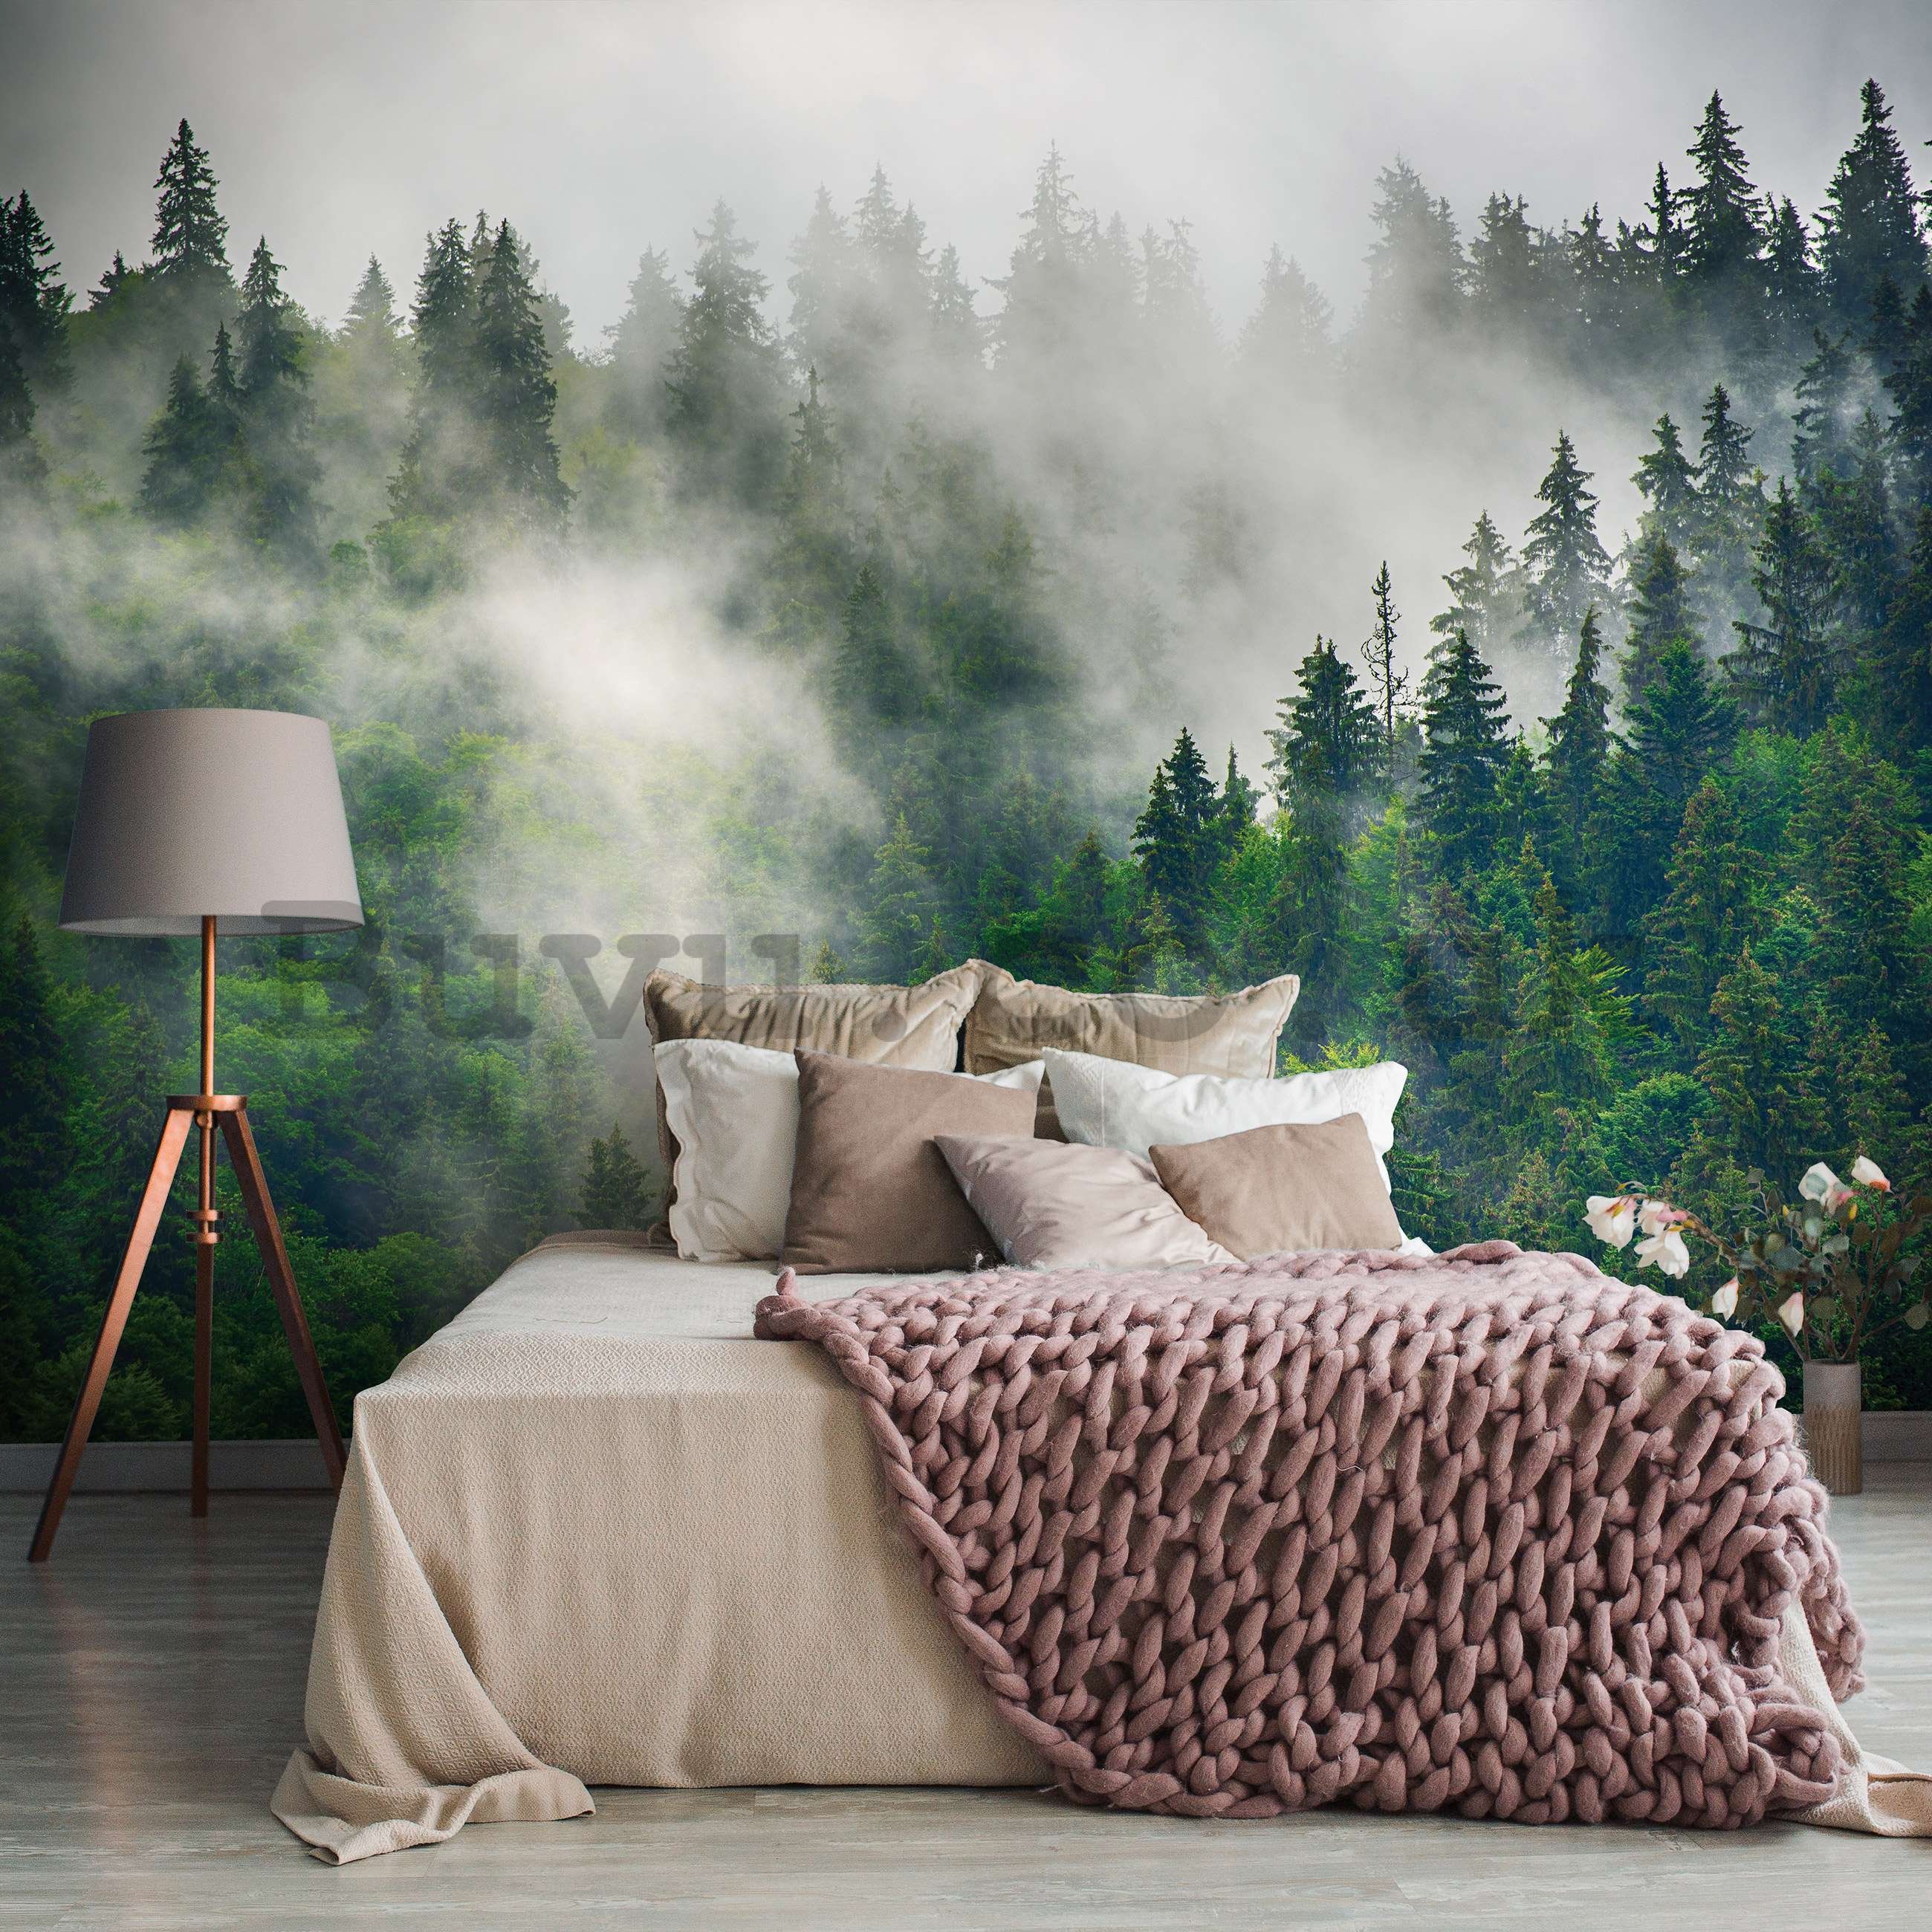 Wall mural vlies: Fog over the forest (5) - 152,5x104 cm